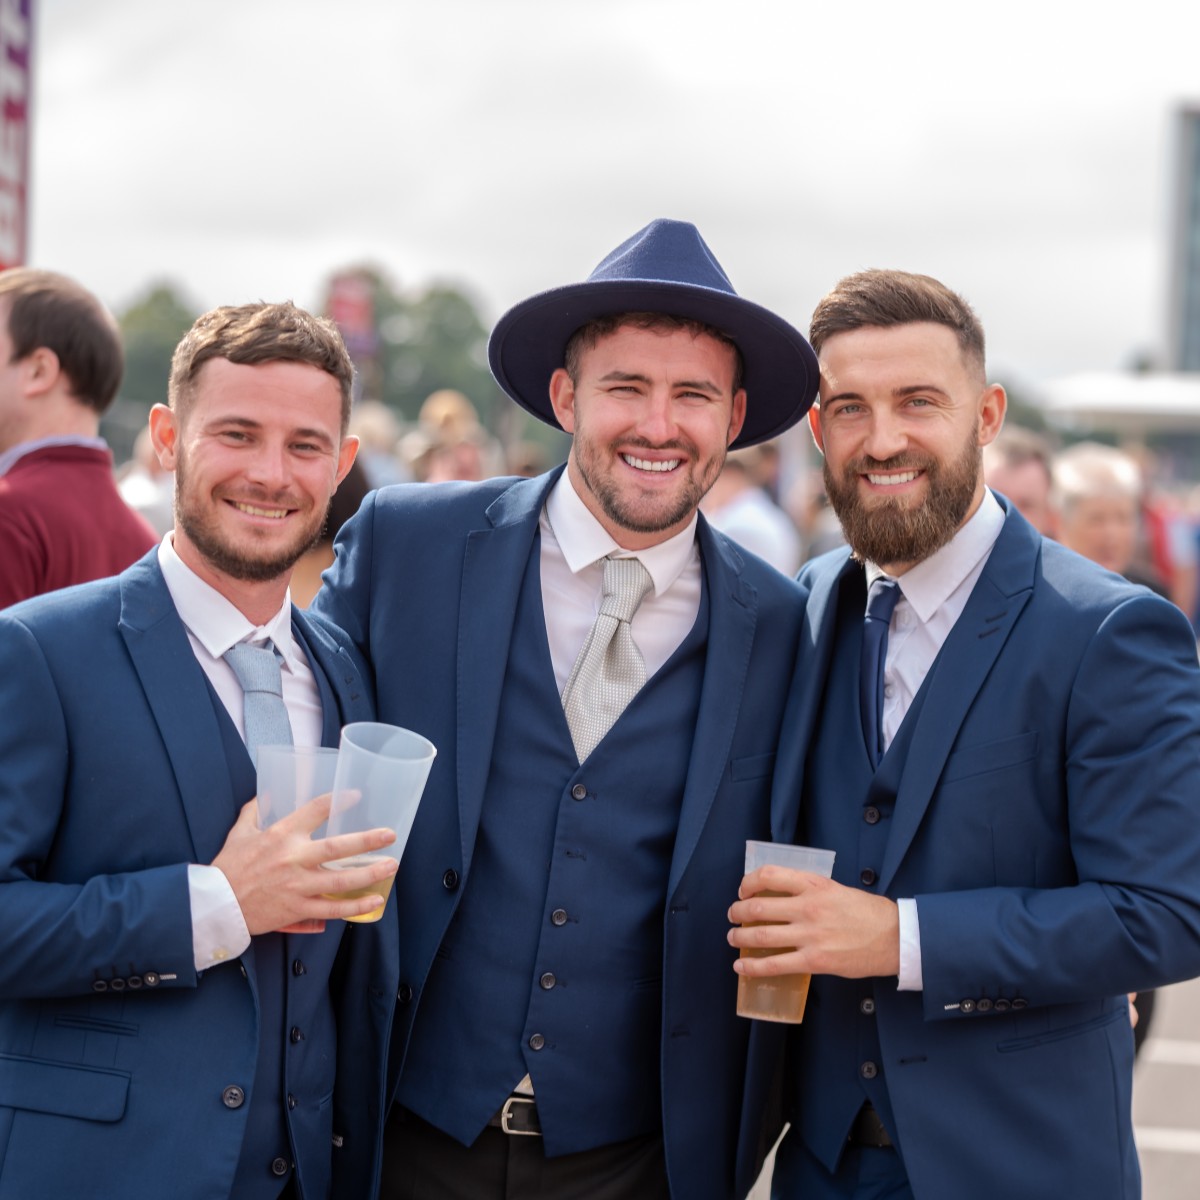 Dress to impress on Gents Day... 👔 Your fashion choices could also win you prizes with the Style Awards. Entry is open to all in attendance. If you place in one of the top positions, you could be going home with some prizes. 🎉 Get your tickets now 👉 brnw.ch/21wIF1D